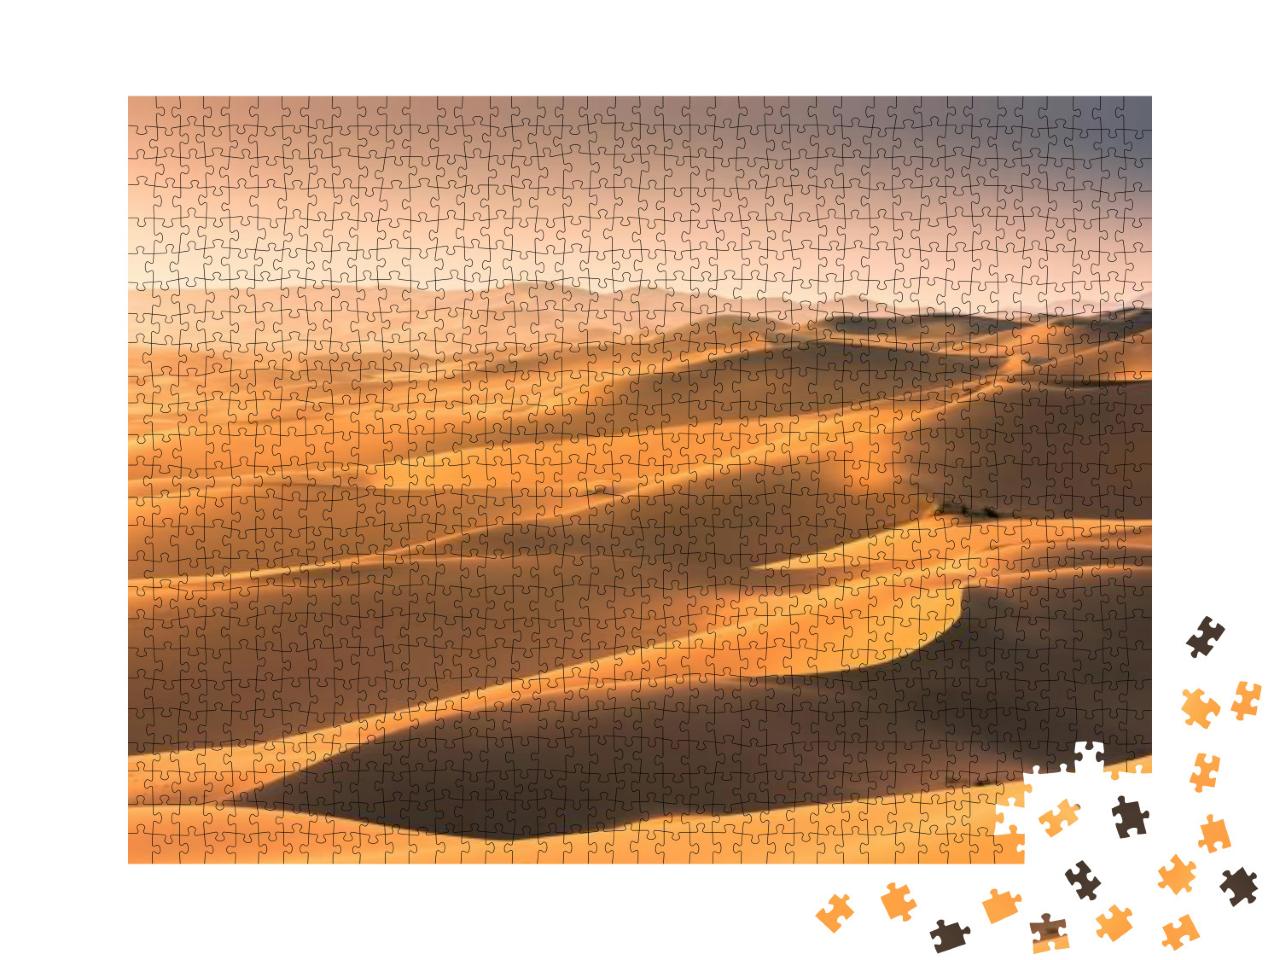 Sand Dunes At Gobi Desert, Mongolia... Jigsaw Puzzle with 1000 pieces